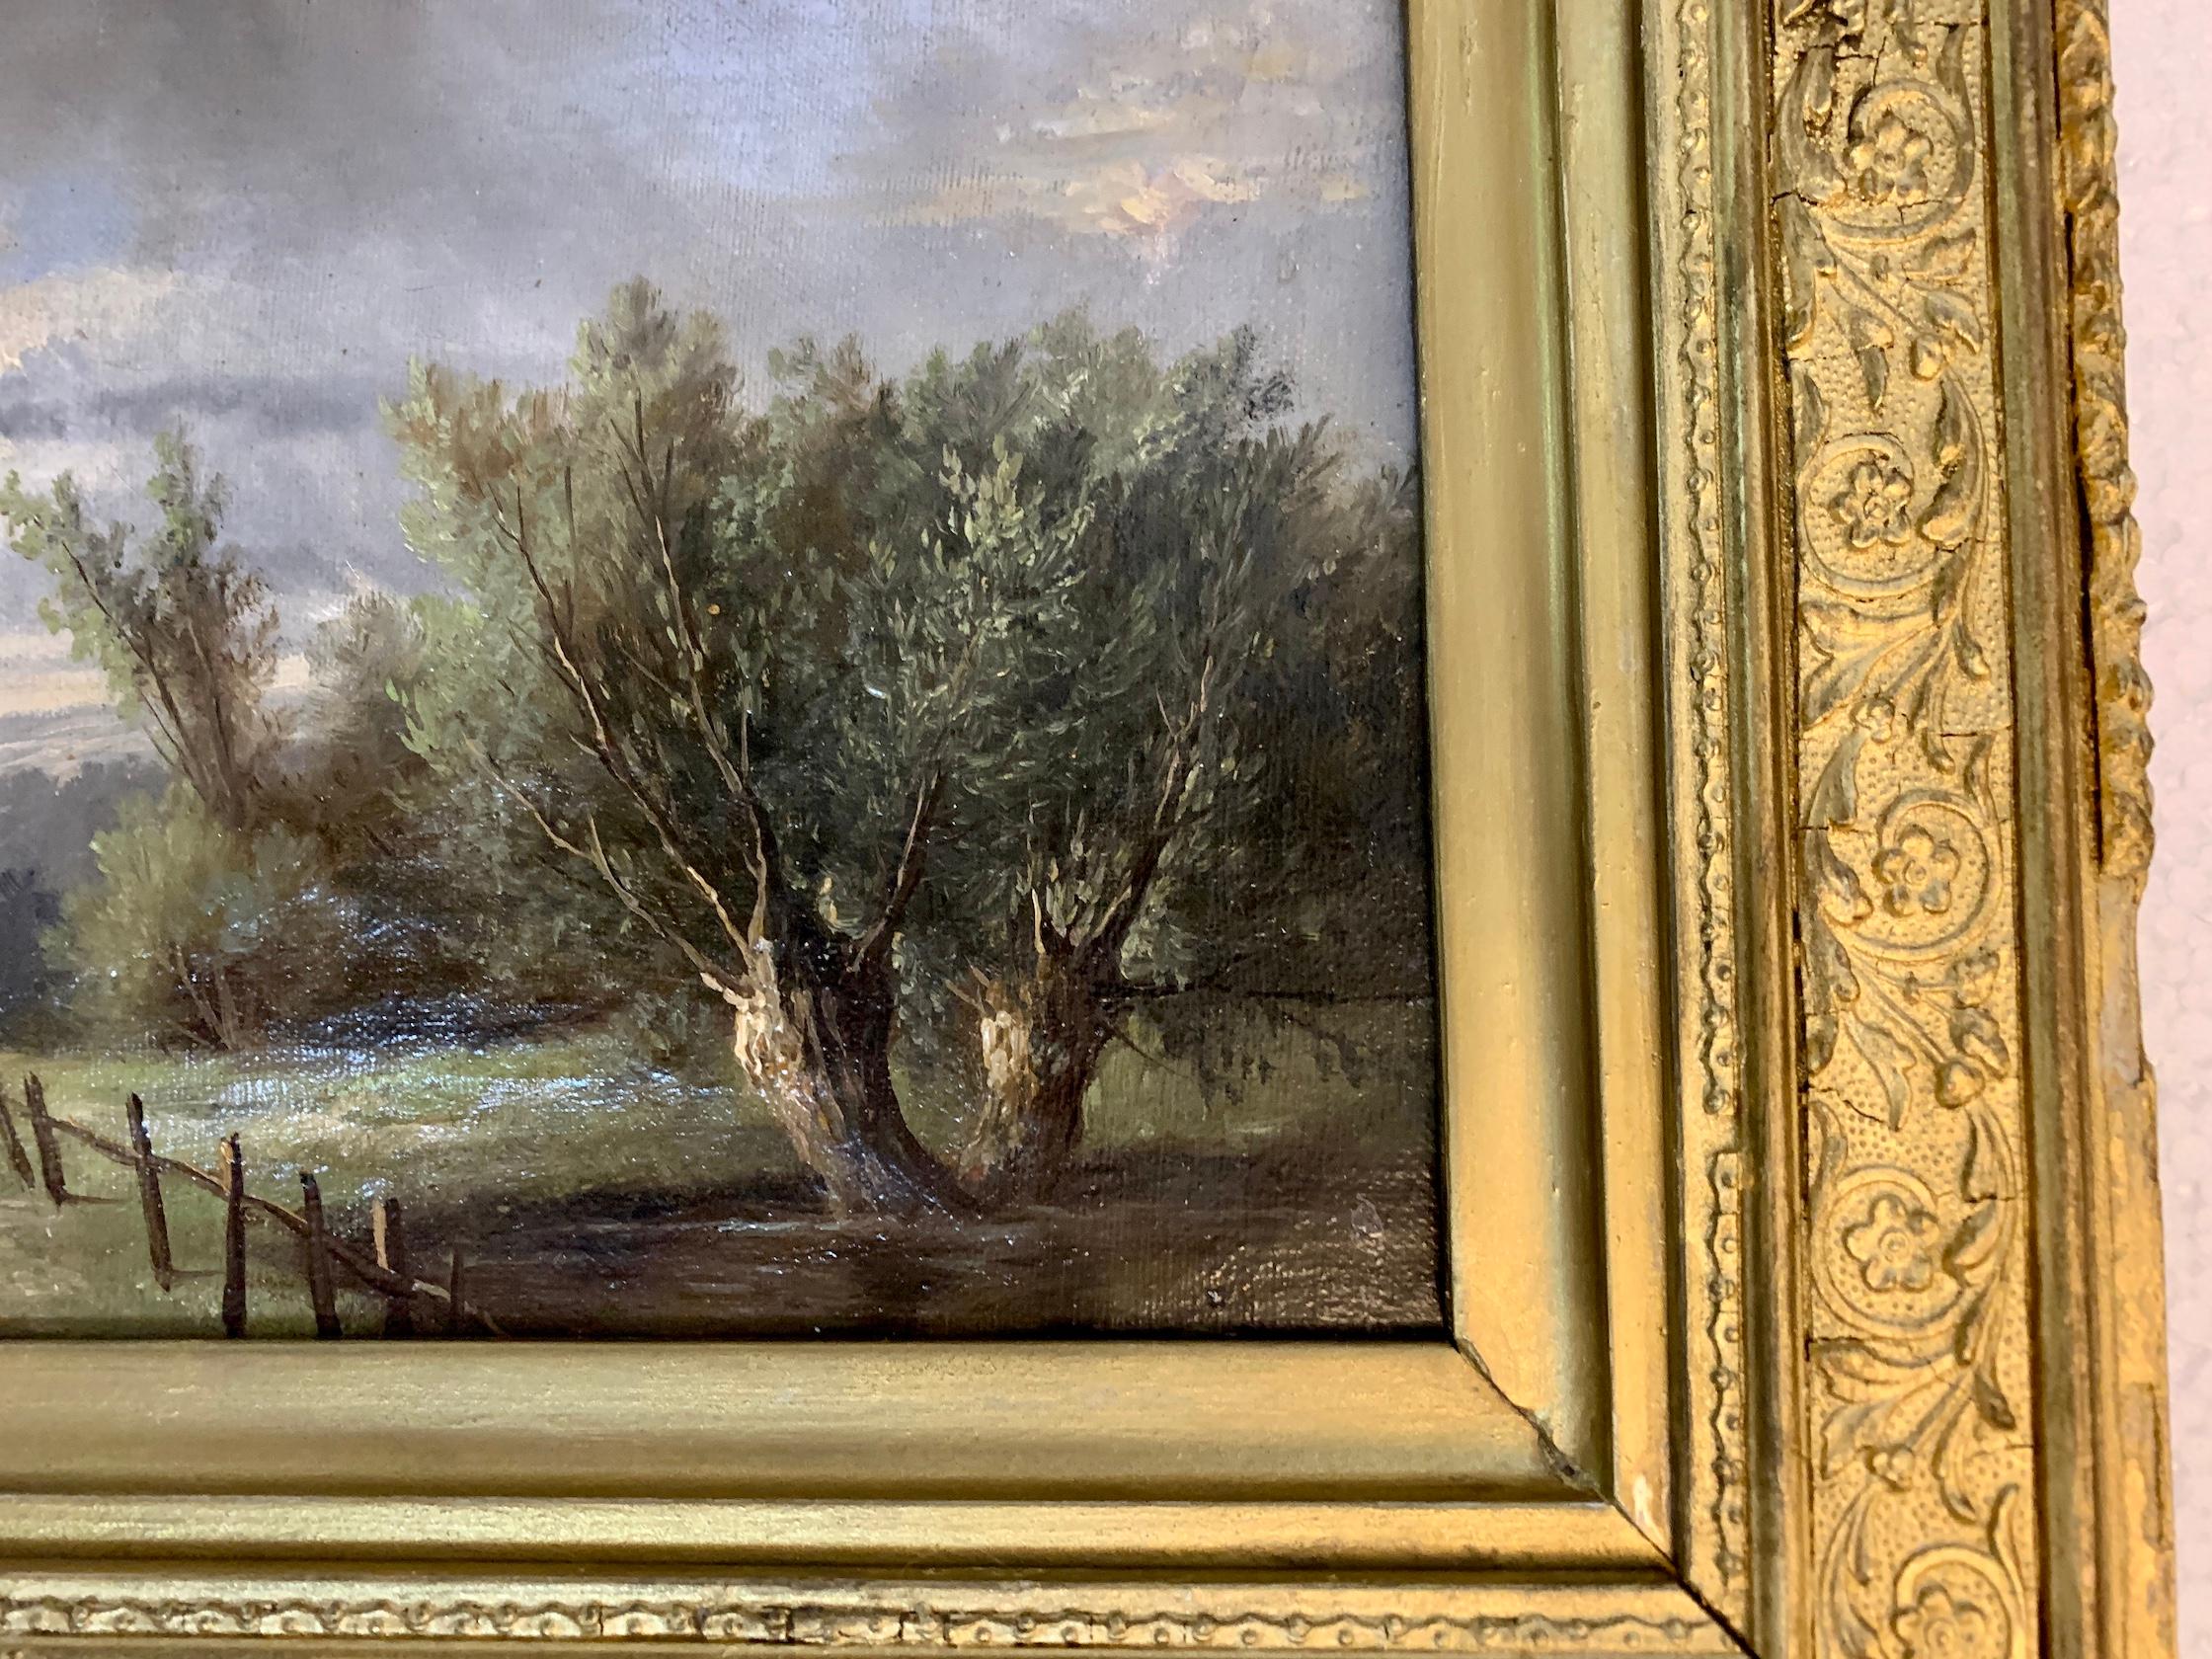 19th century English landscape with Oak and Yew trees on a pathway For Sale 3